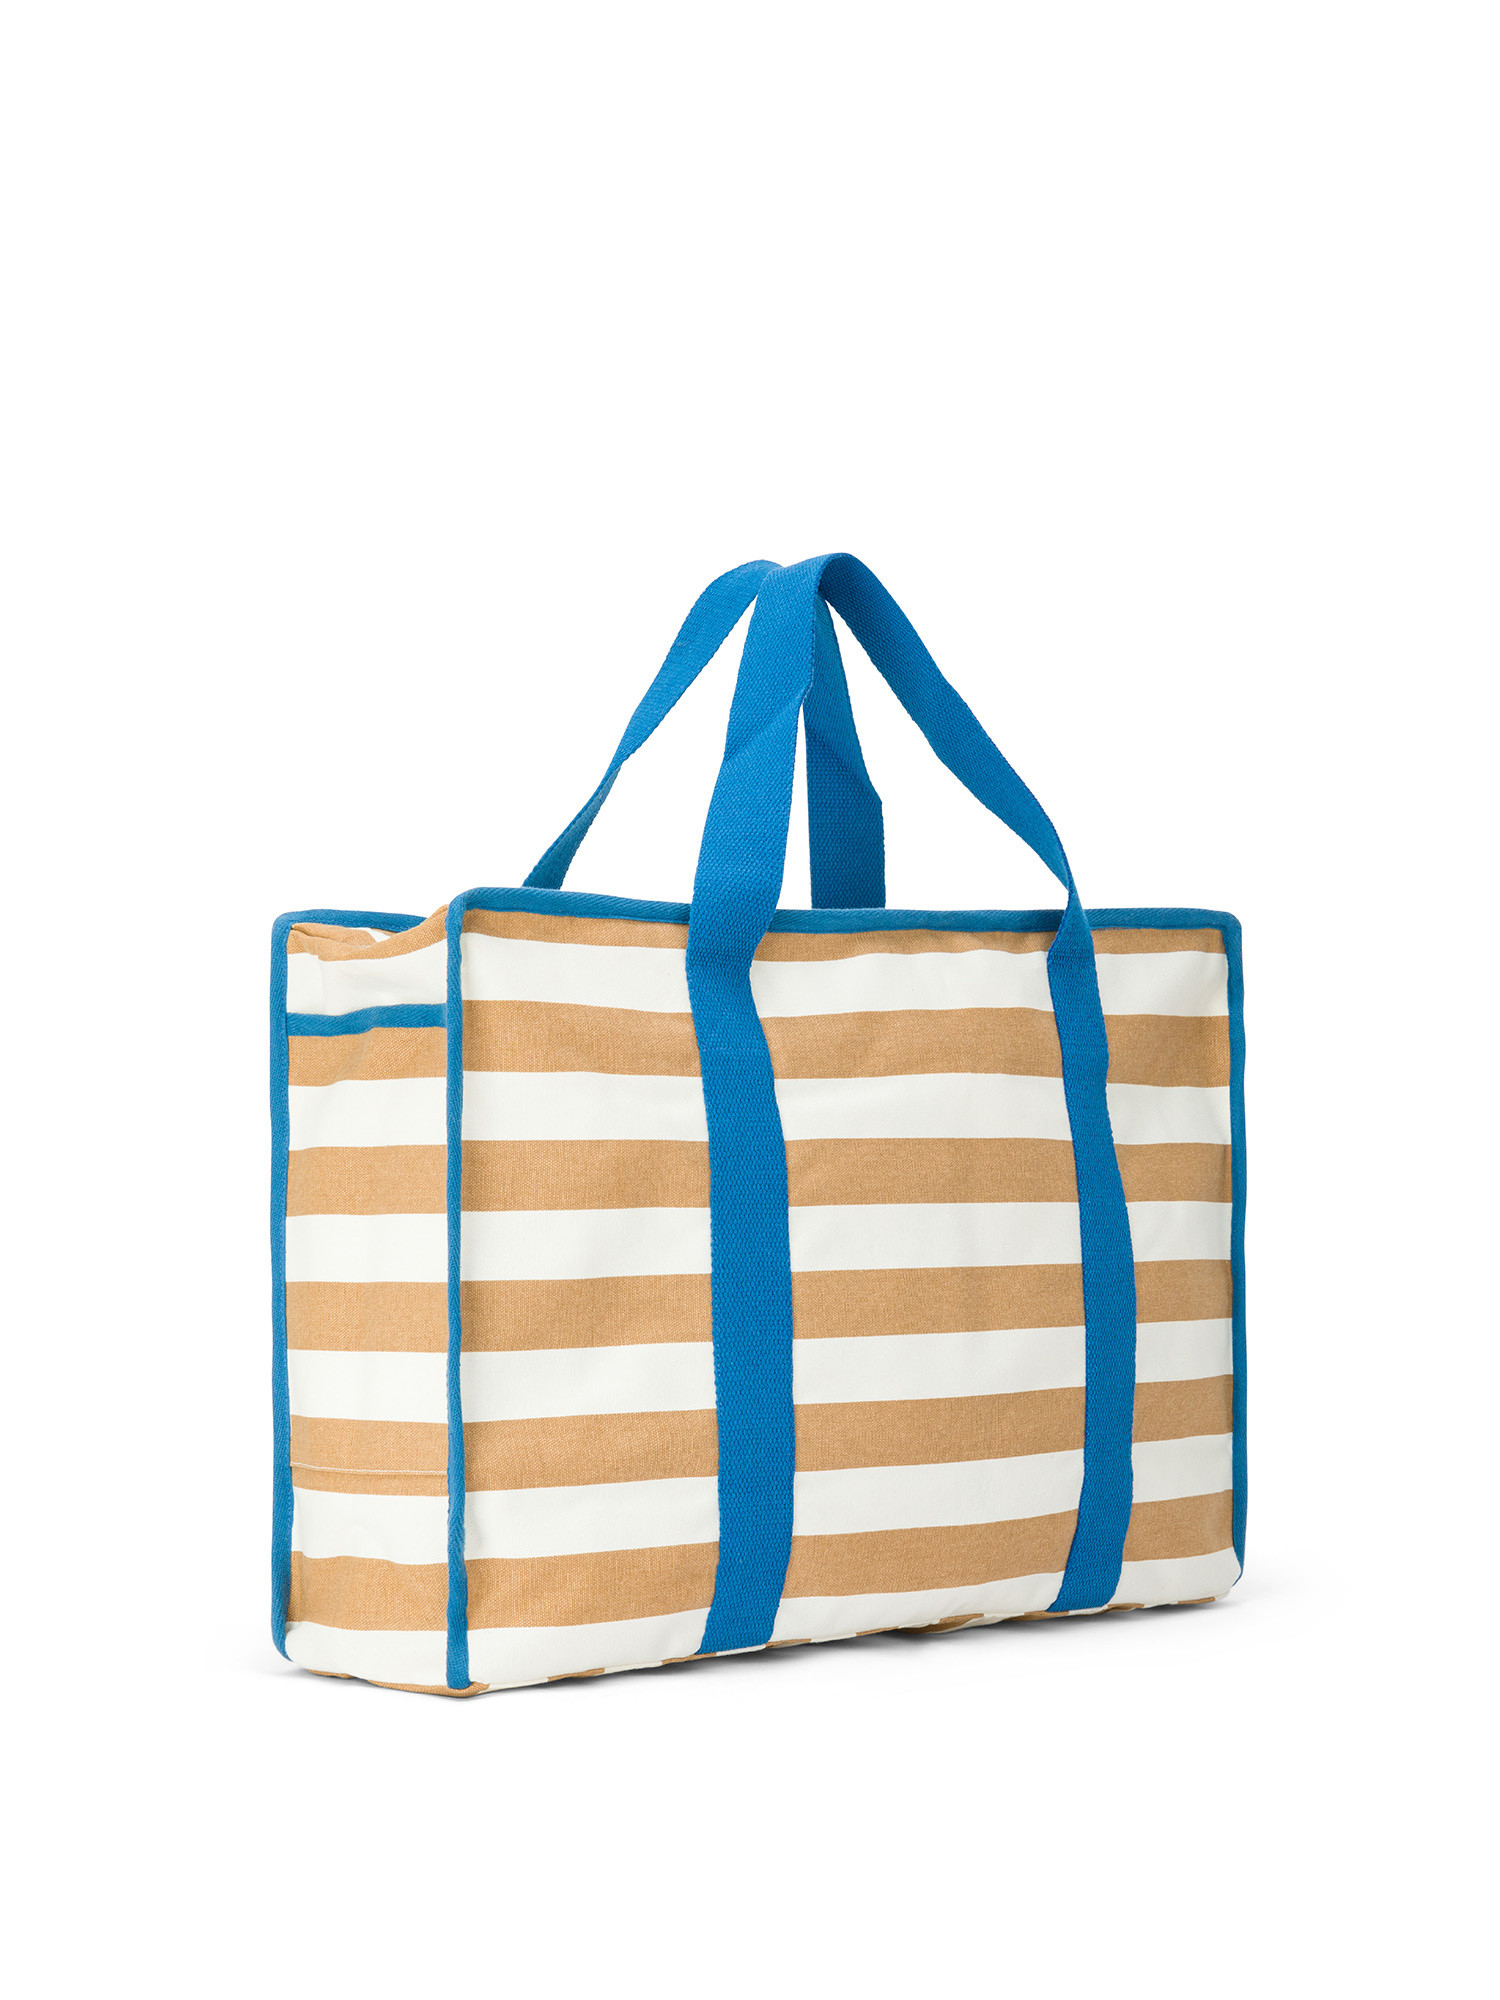 Beach bag with zip closure and side pockets, Multicolor, large image number 1